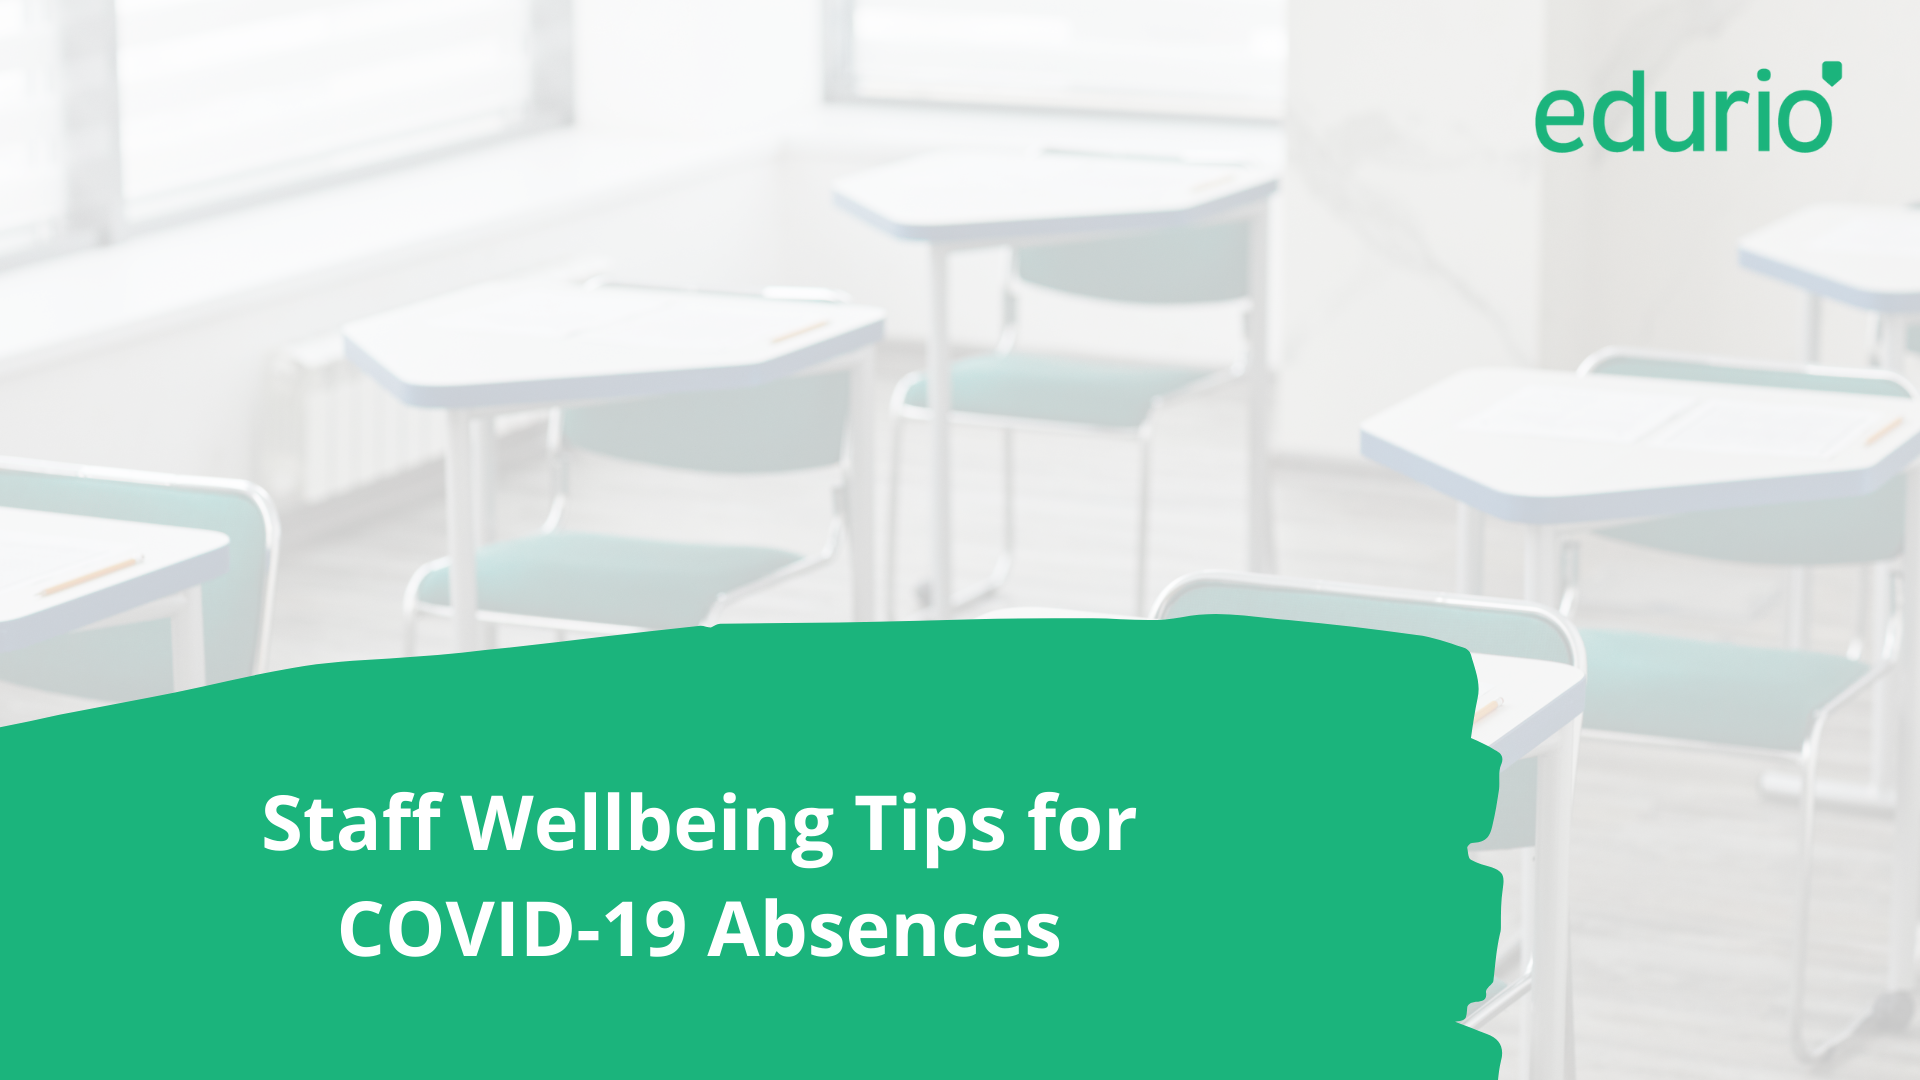 Staff Wellbeing Tips for COVID-19 Absences